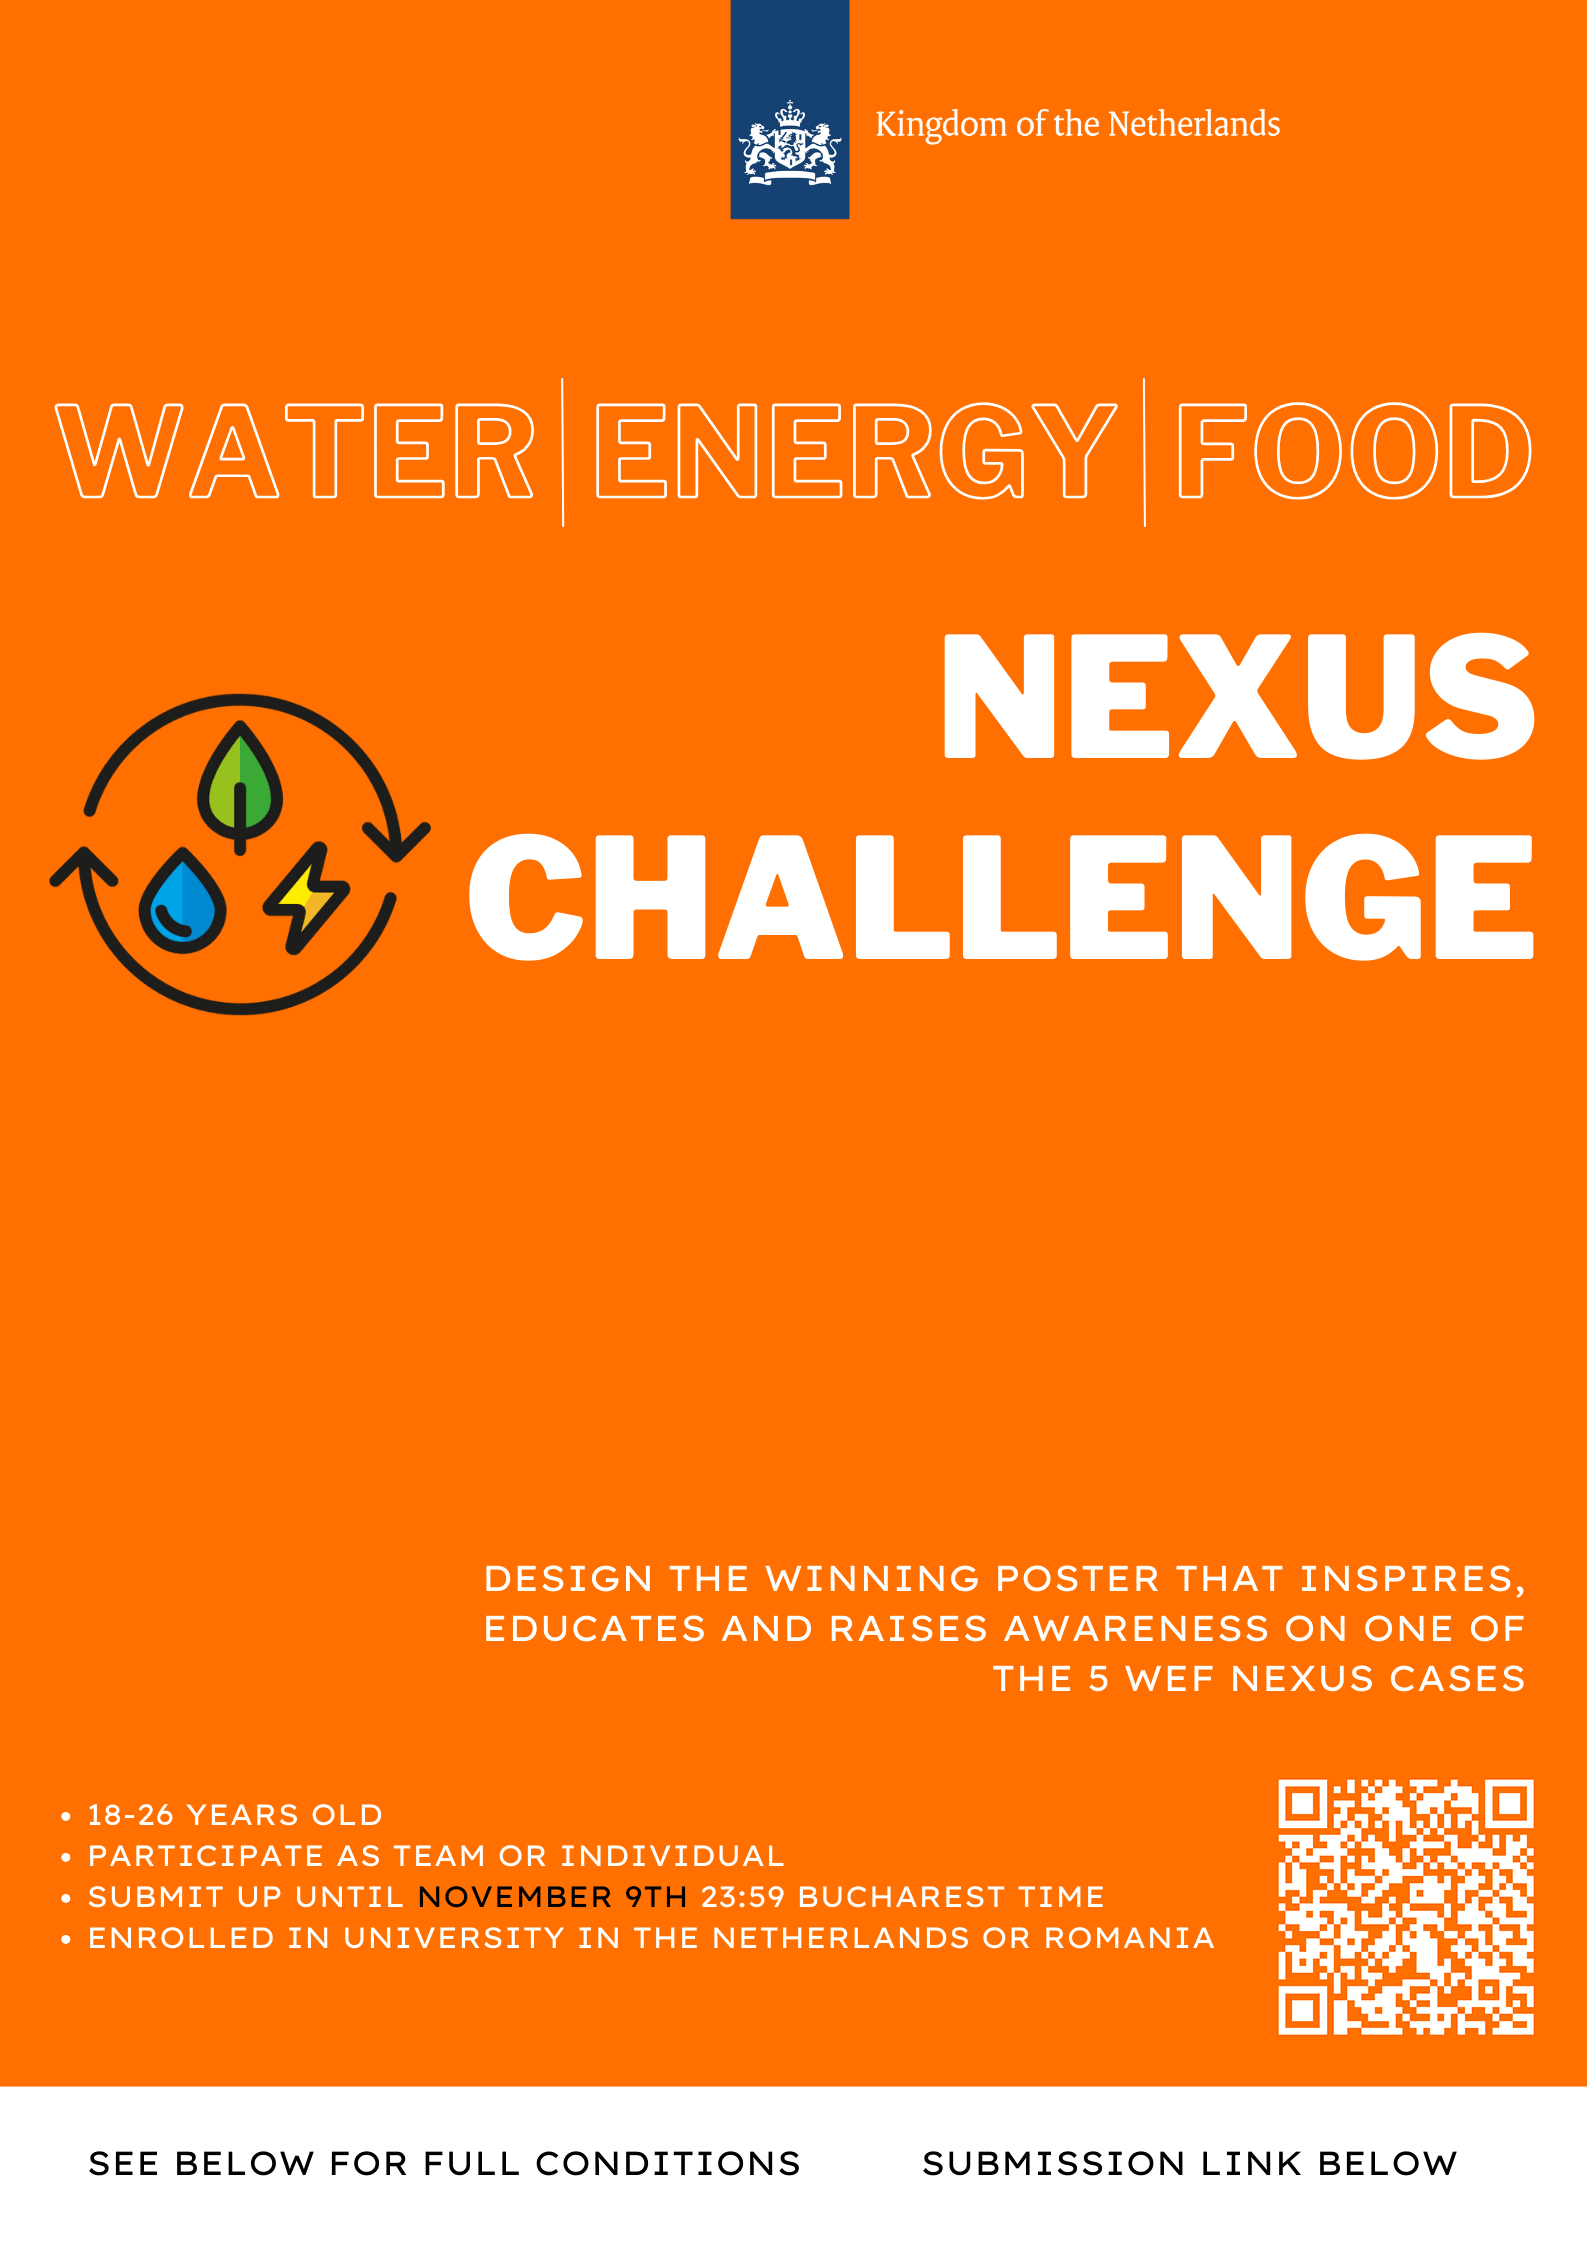 Embassy of the Kingdom of the Netherlands Has Launched the Water-Energy-Food Nexus Poster Competition